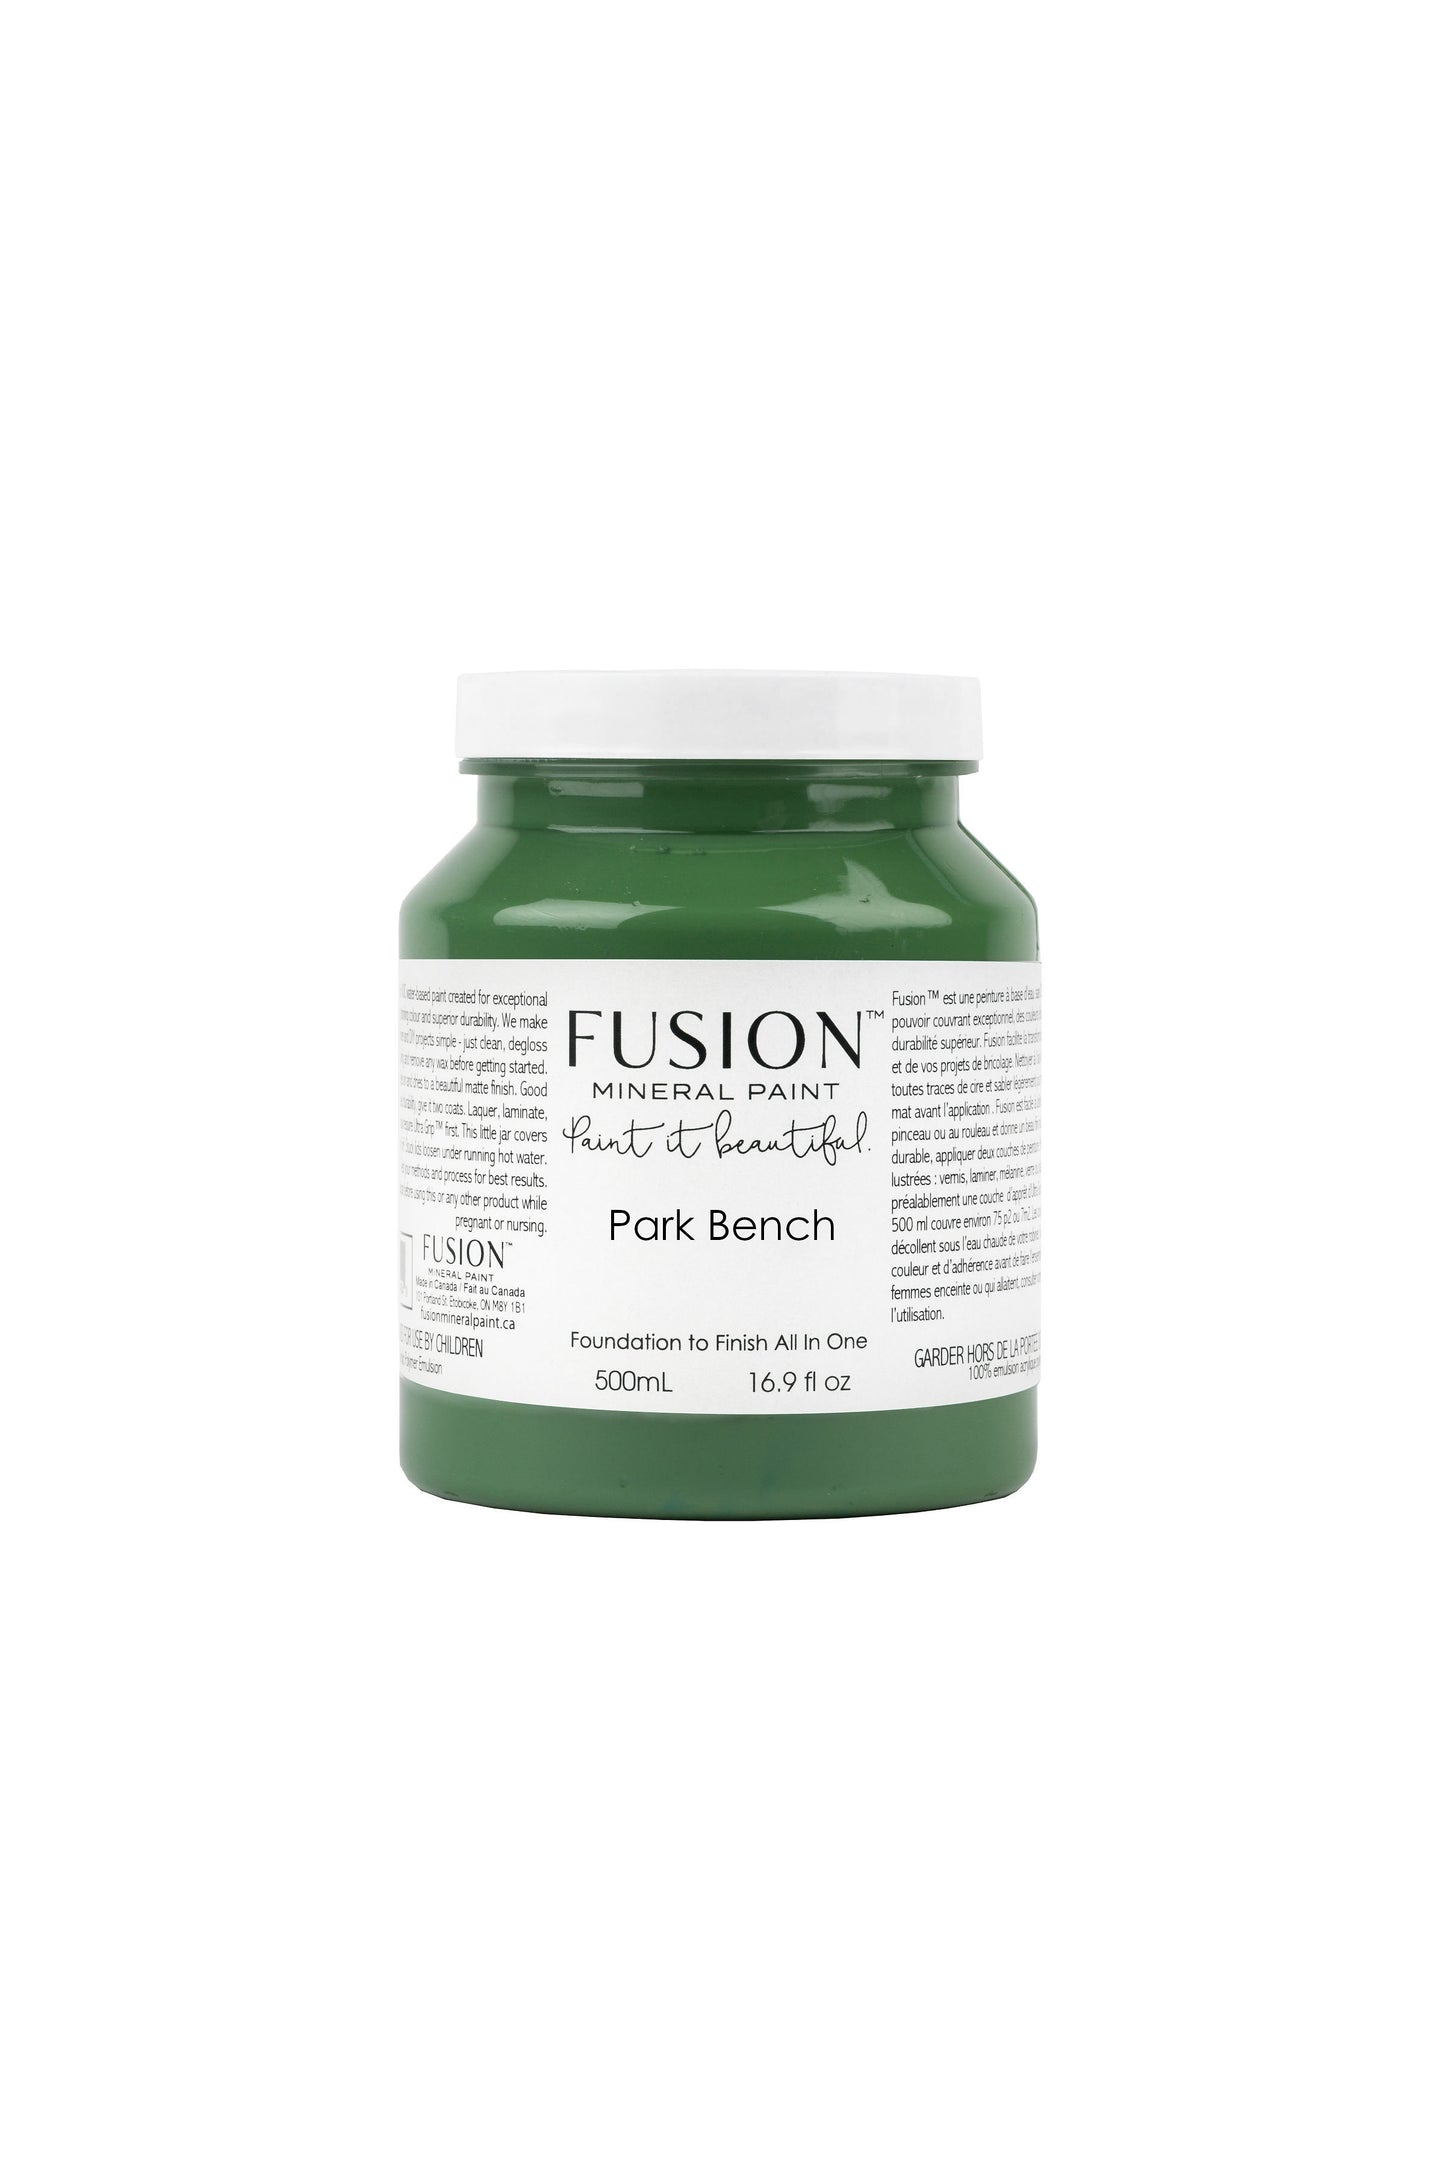 Park Bench Fusion Mineral Paint, Forest Green Paint Color| 500ml Pint Size